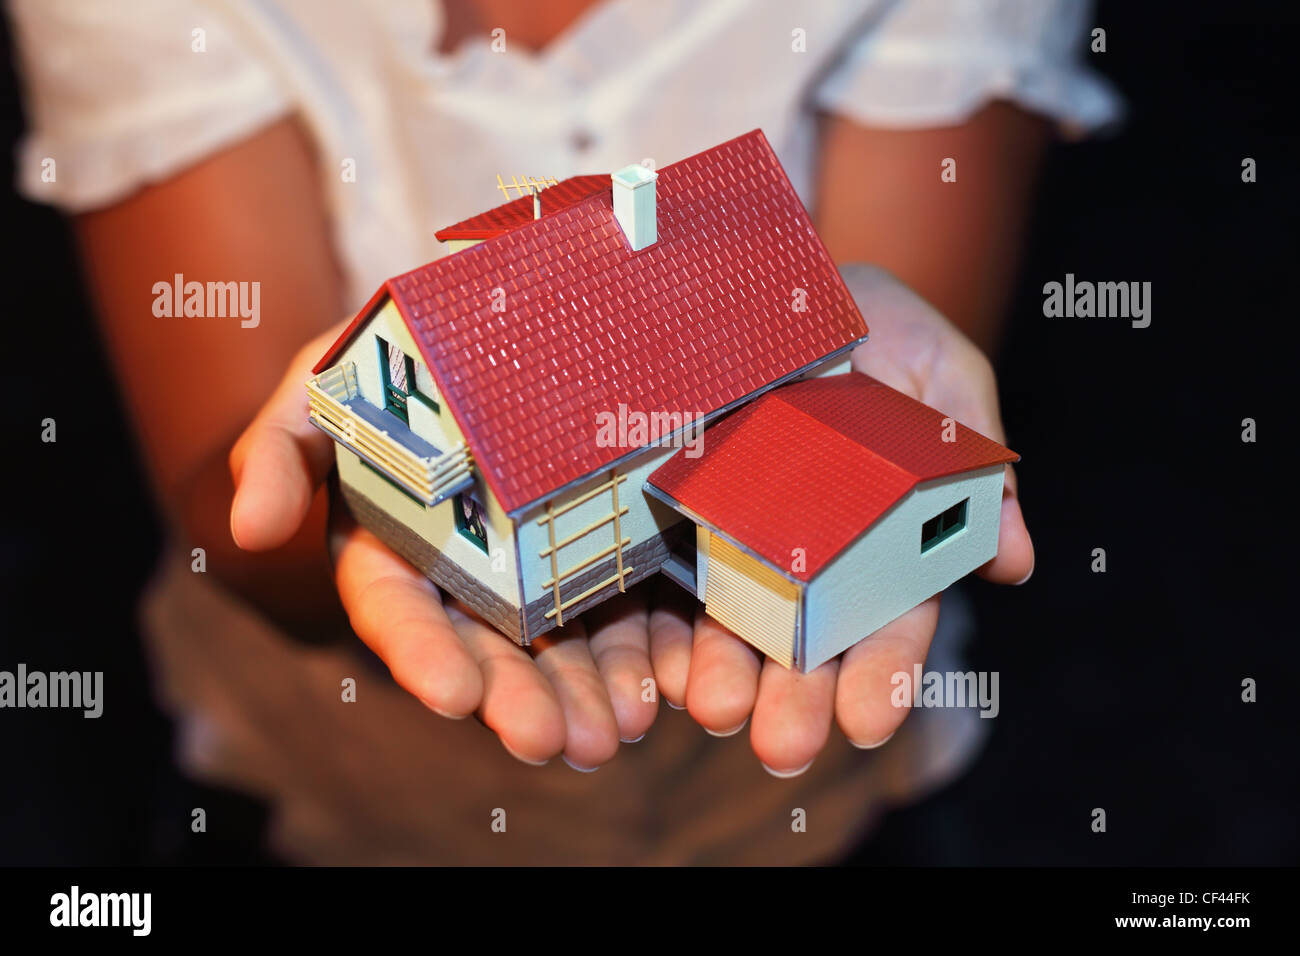 model of house with garage on hands Stock Photo